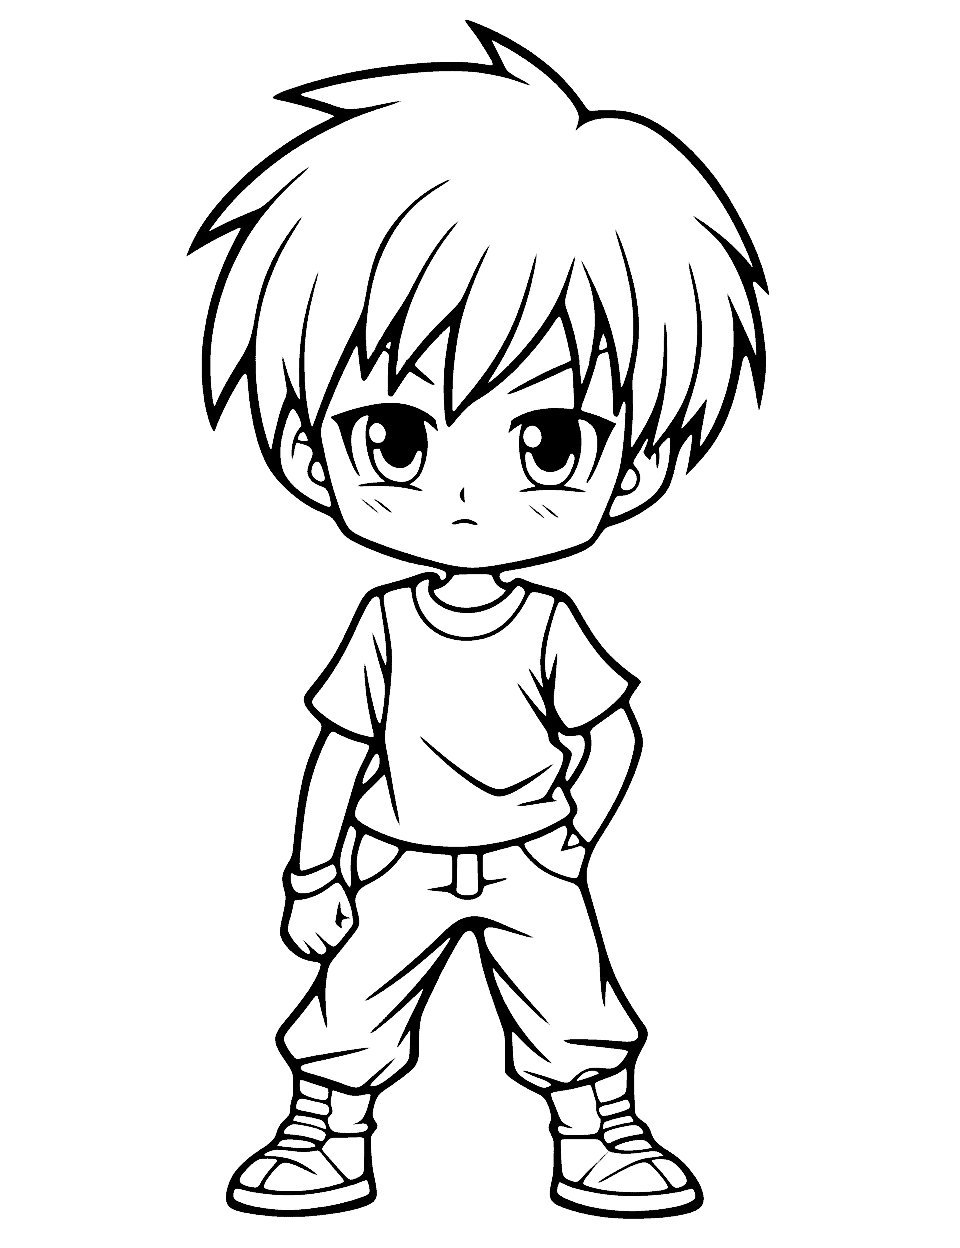 10 Anime Coloring Pages For Kids of All Ages  Skip To My Lou